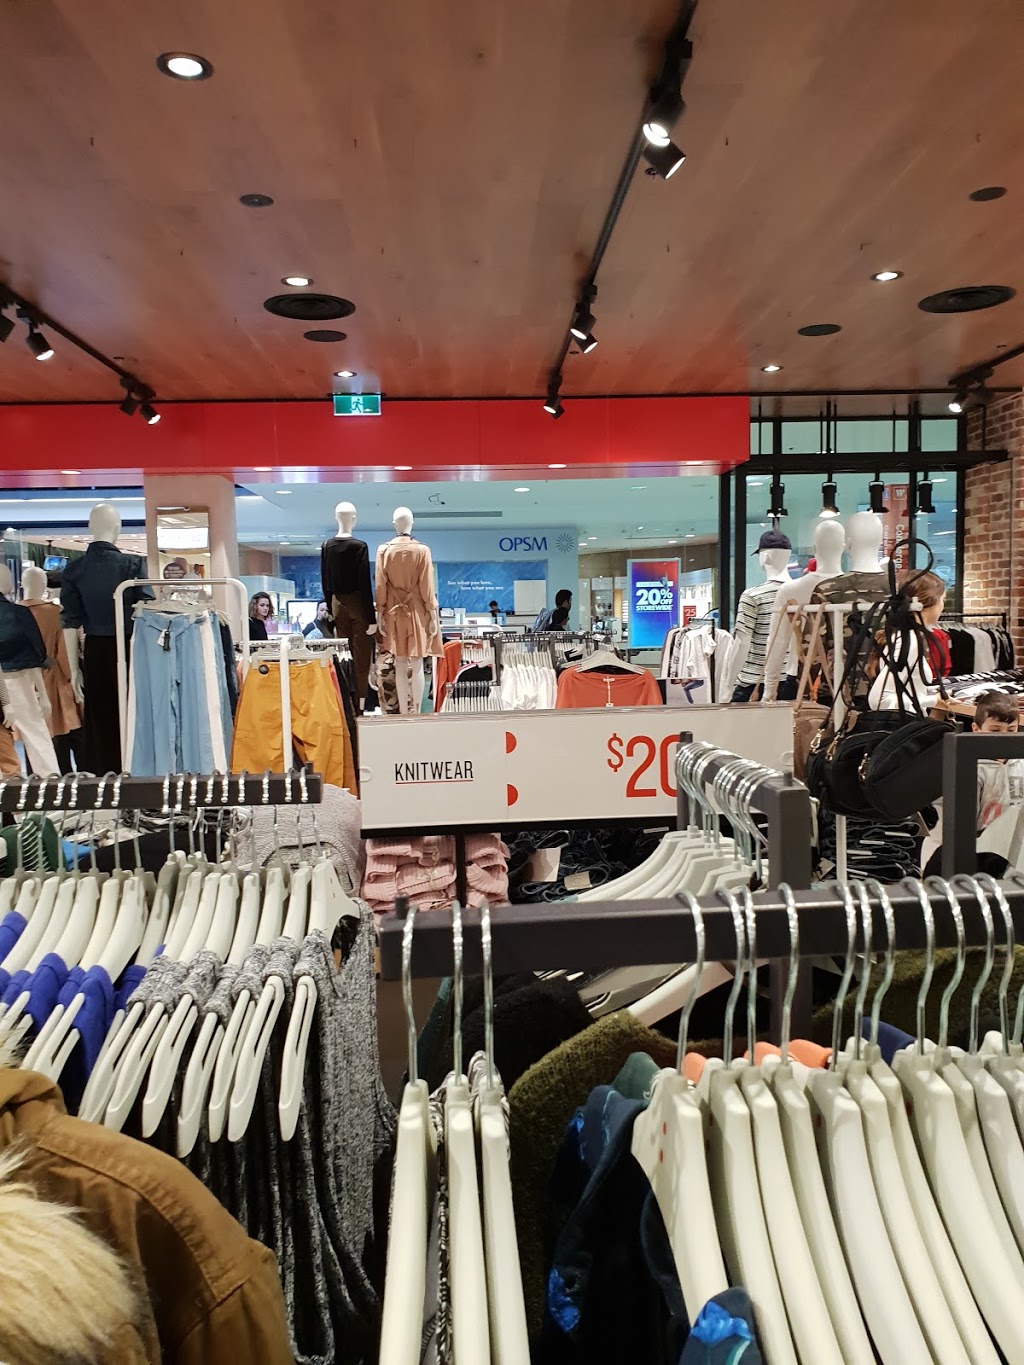 Cotton On | clothing store | Shop MM34/29-35 Louis St, Airport West VIC 3042, Australia | 0393345501 OR +61 3 9334 5501